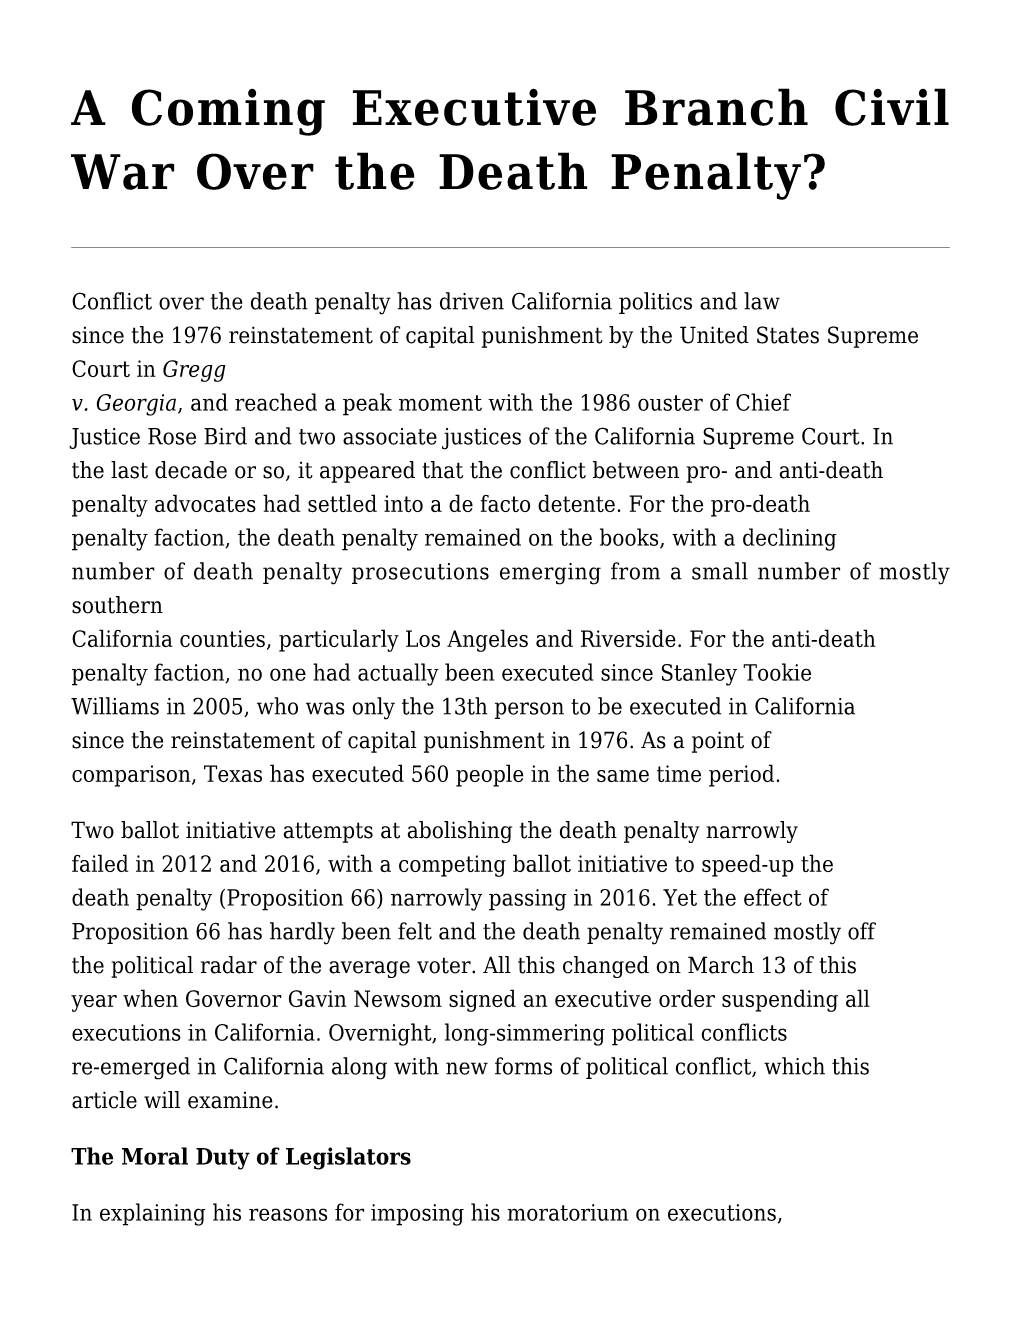 A Coming Executive Branch Civil War Over the Death Penalty?